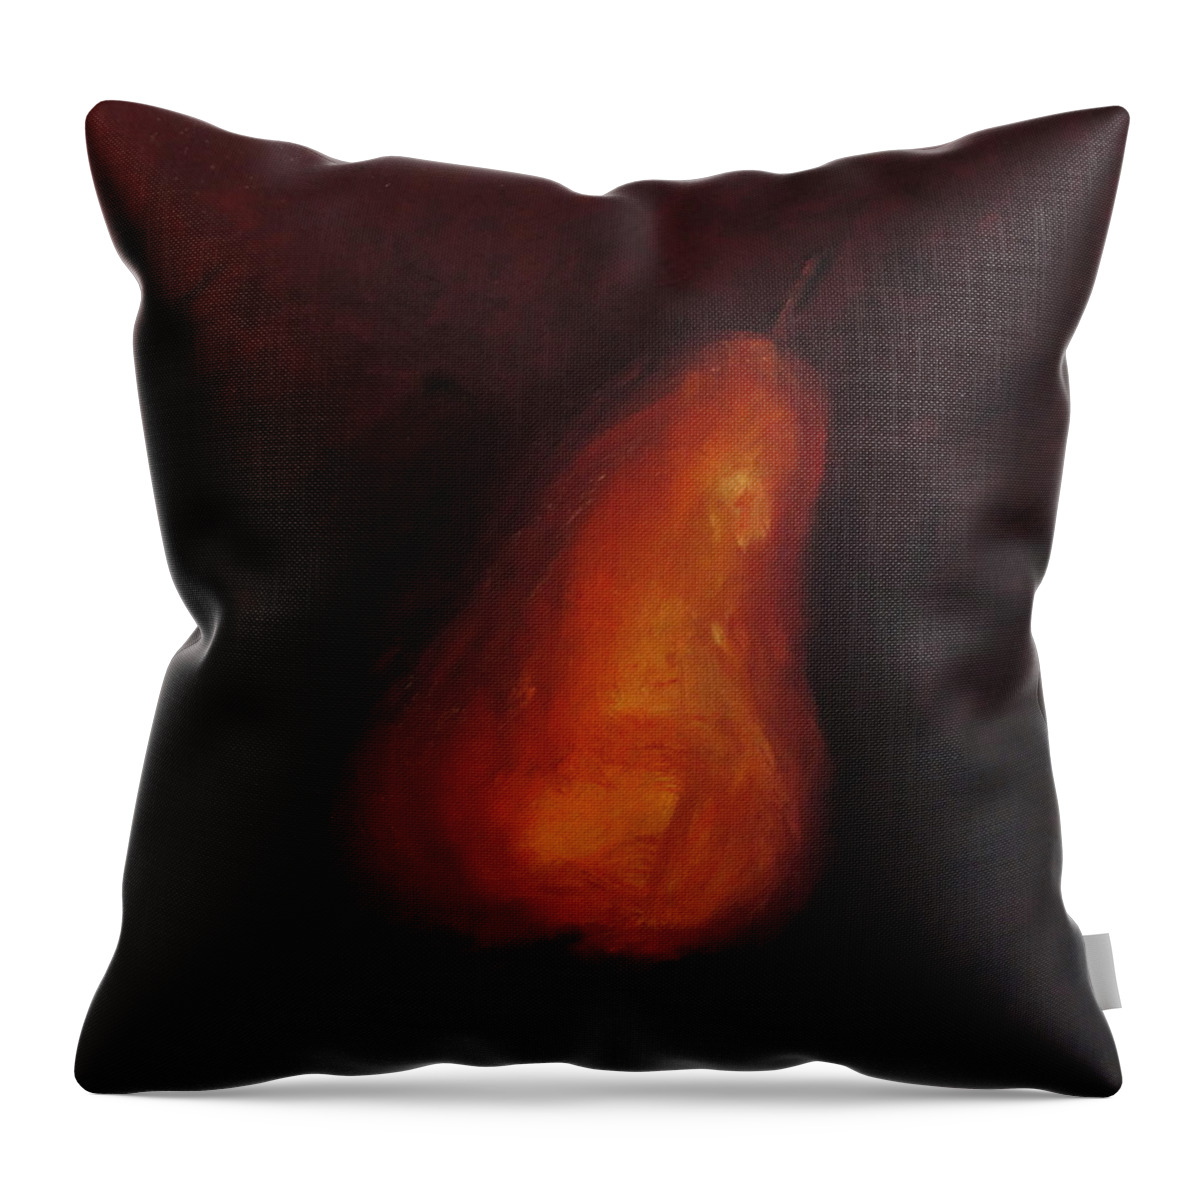 Persephone Throw Pillow featuring the painting Persephone by Shannon Grissom